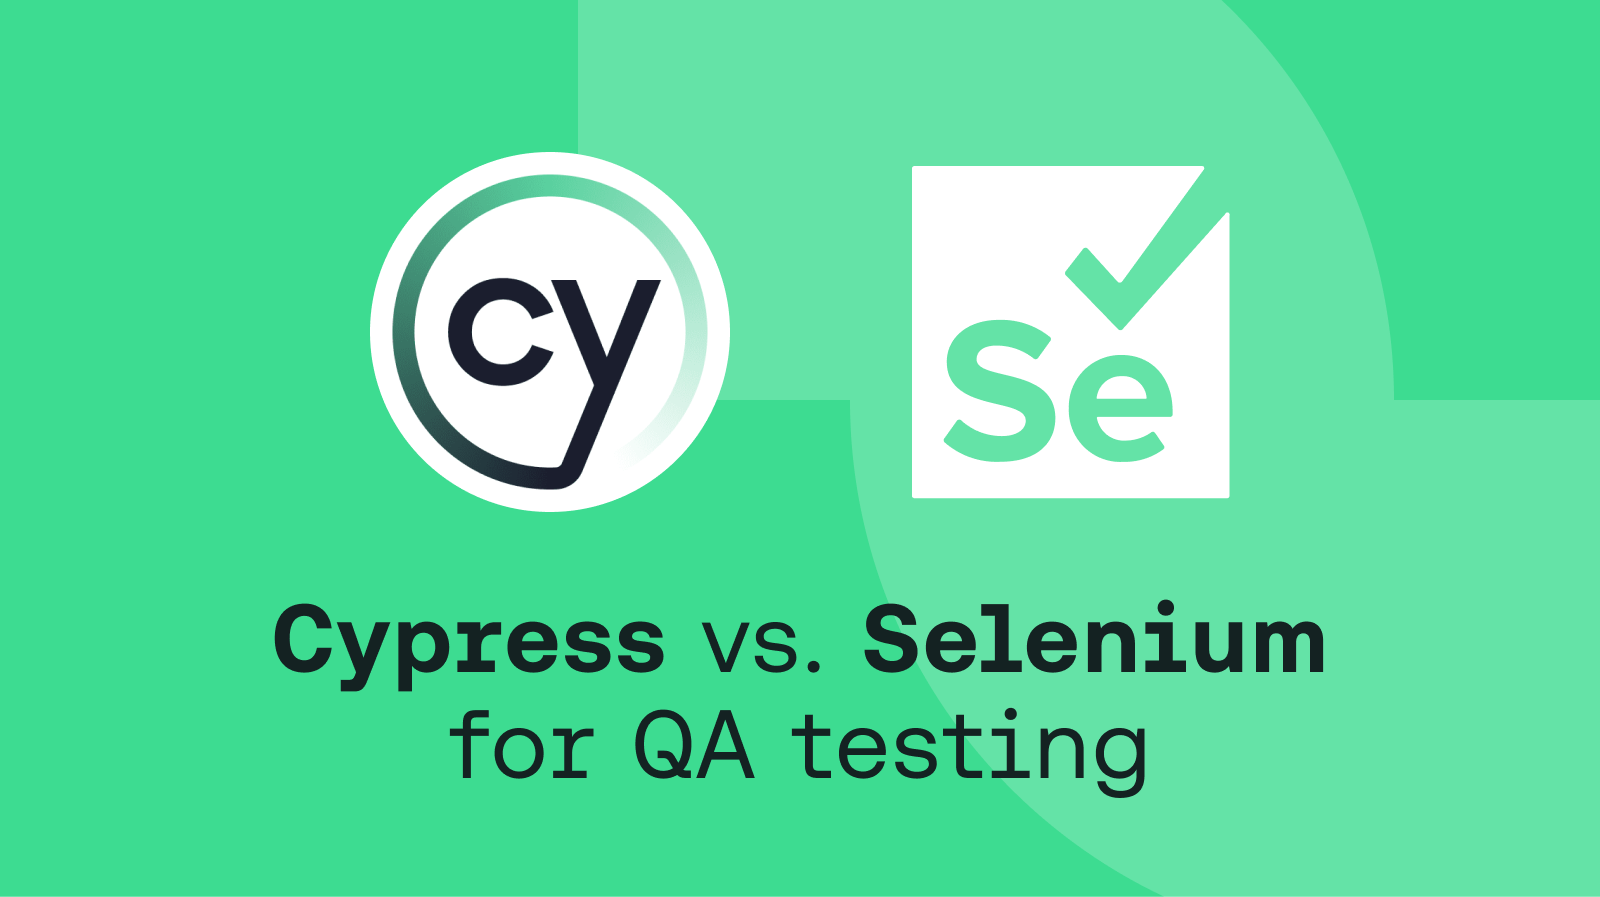 Cypress only supports JavaScript and Selenium offers more flexibility, but each has their benefits and drawbacks. Find out which testing option is right for you.  